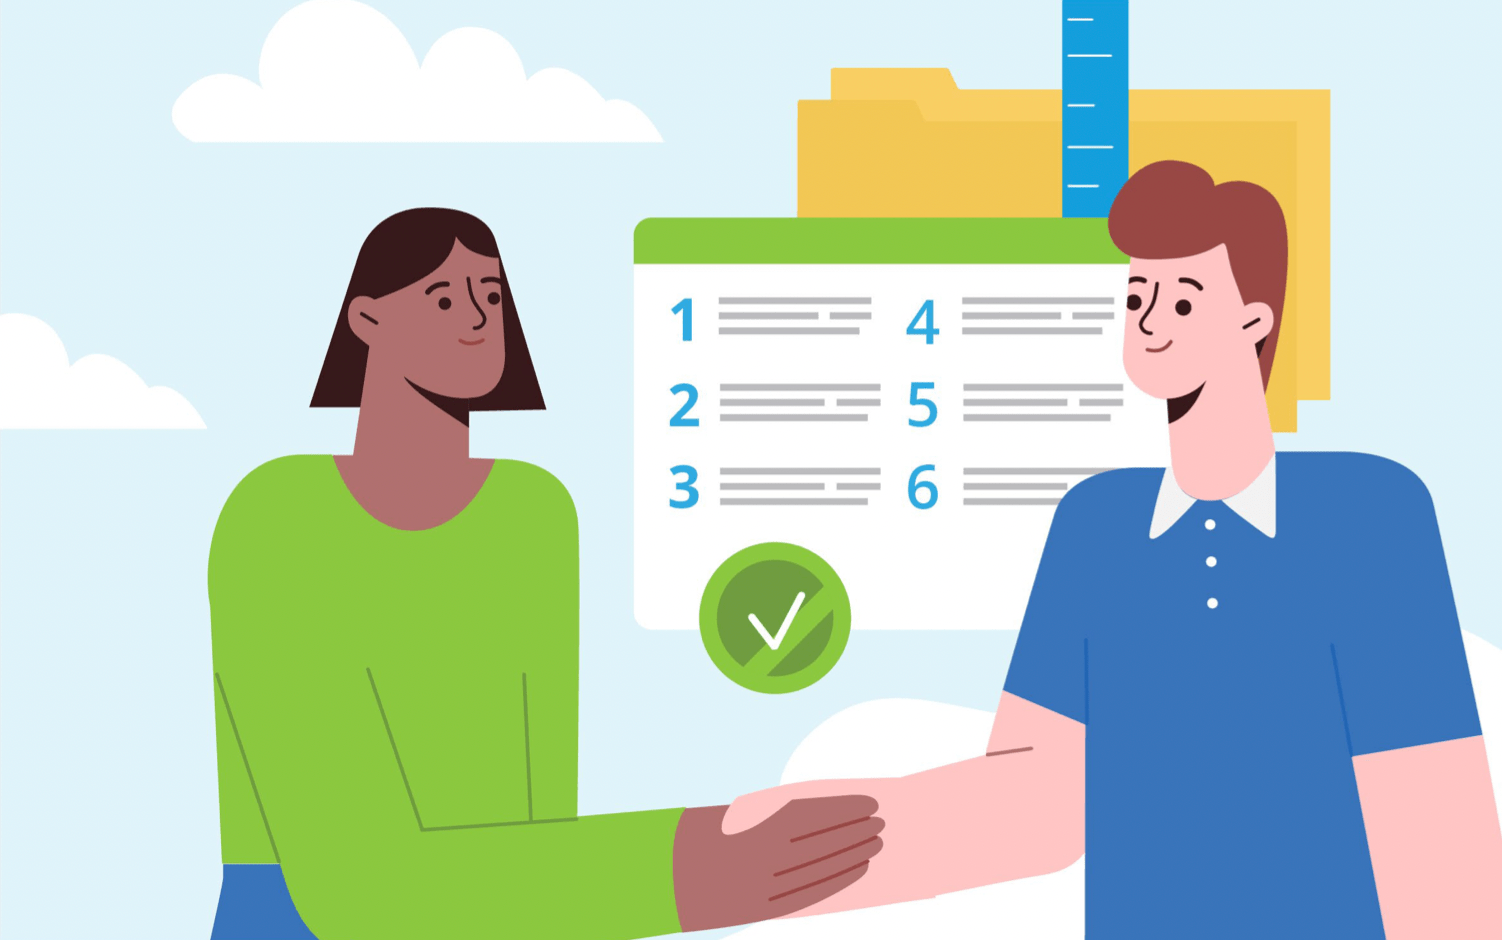 An illustration of an accountant shaking hands with a new ecommerce client. In the background is a cartoon of a list of items, an onboarding list for the new client